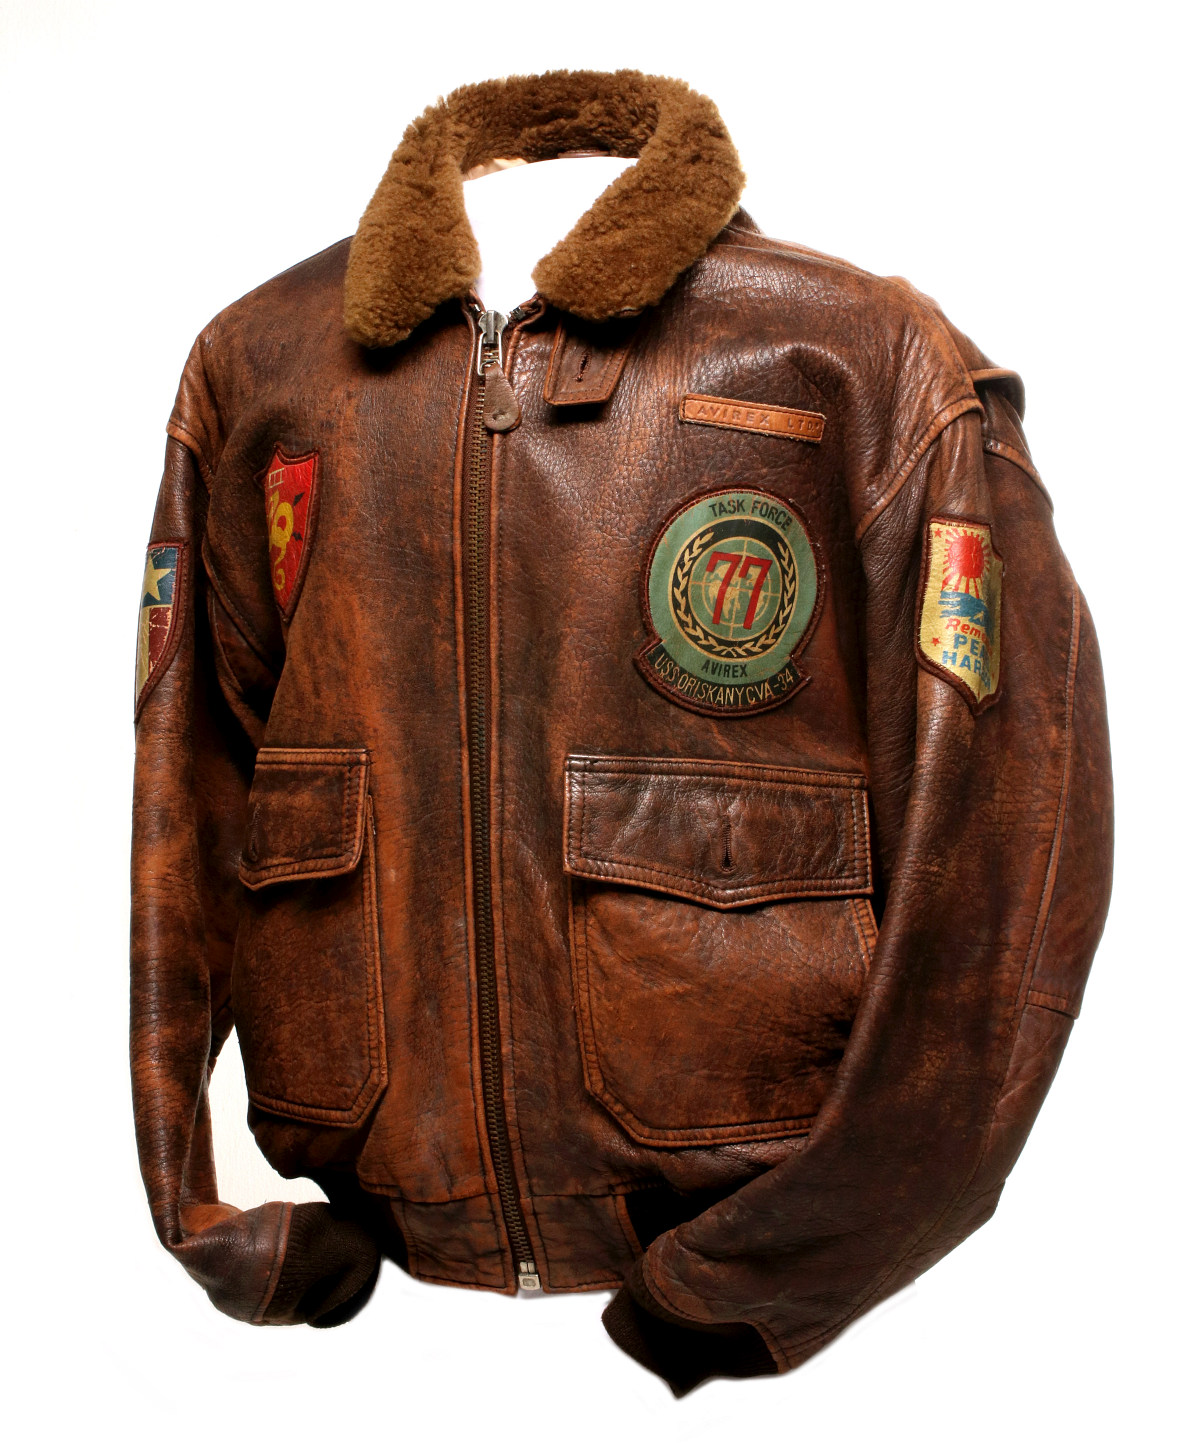 AN AVIREX LEATHER BOMBER JACKET DATED 1987